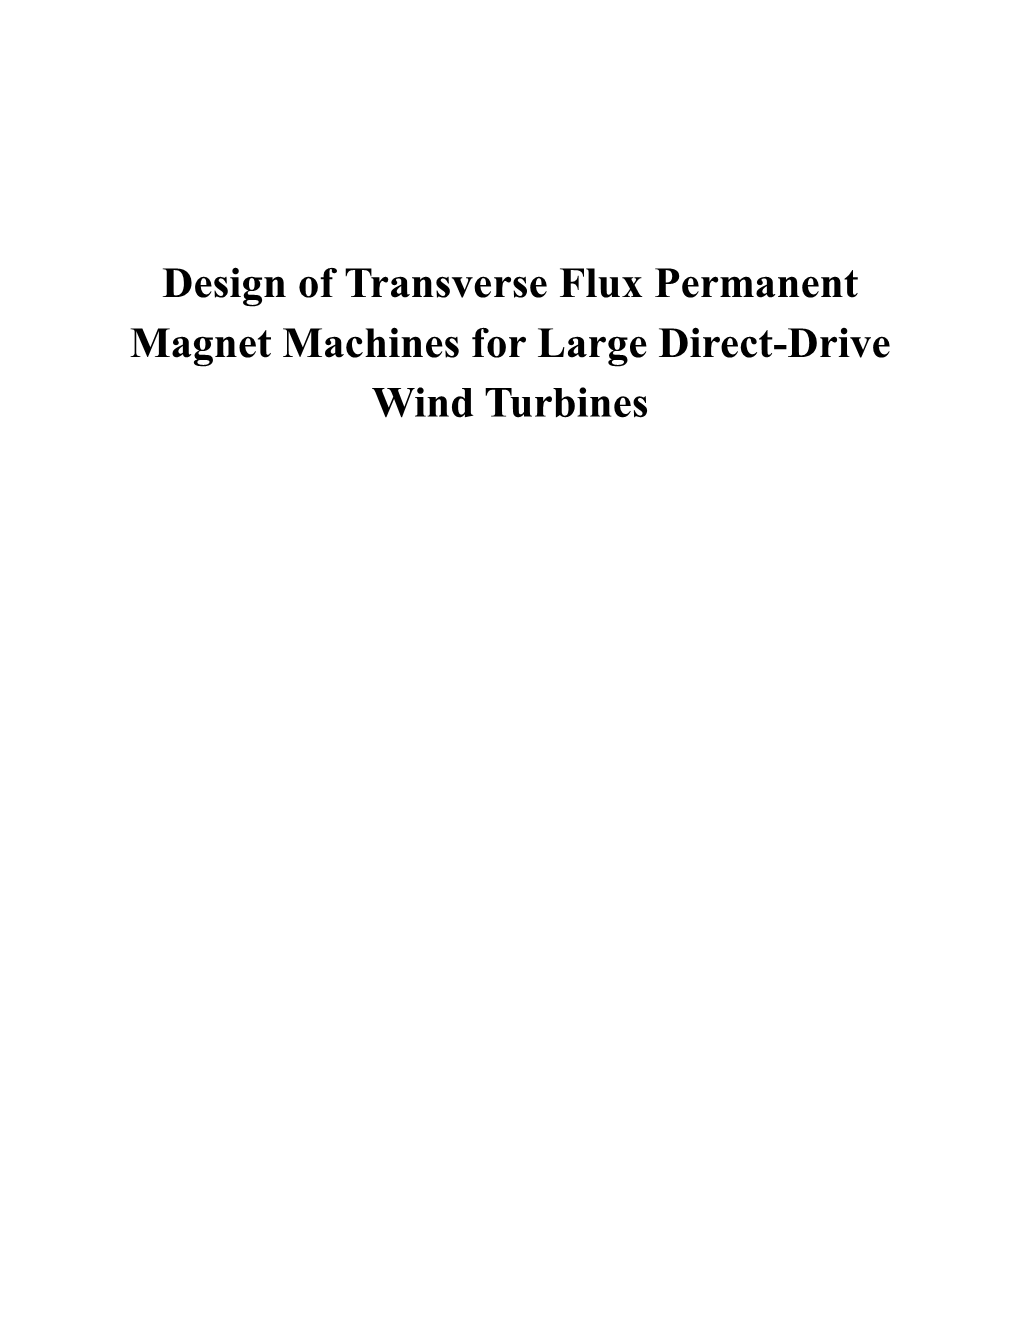 Design of Transverse Flux Permanent Magnet Machines for Large Direct-Drive Wind Turbines